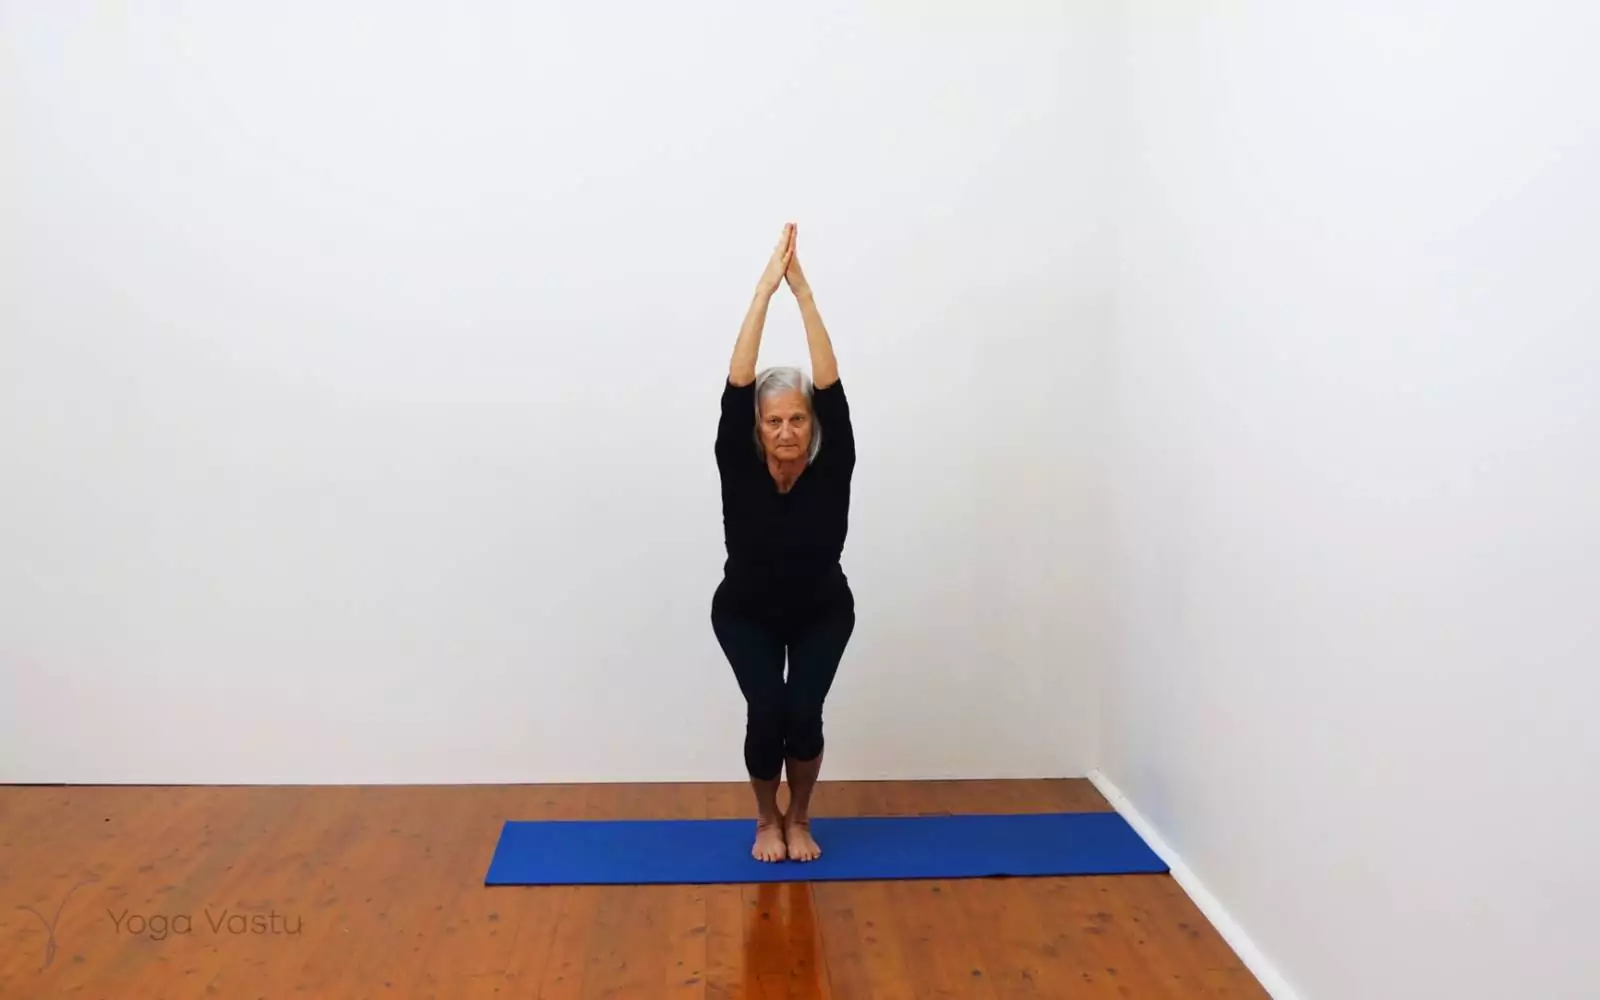 A Yoga Practice That Won't Bear Weight on Hands or Knees